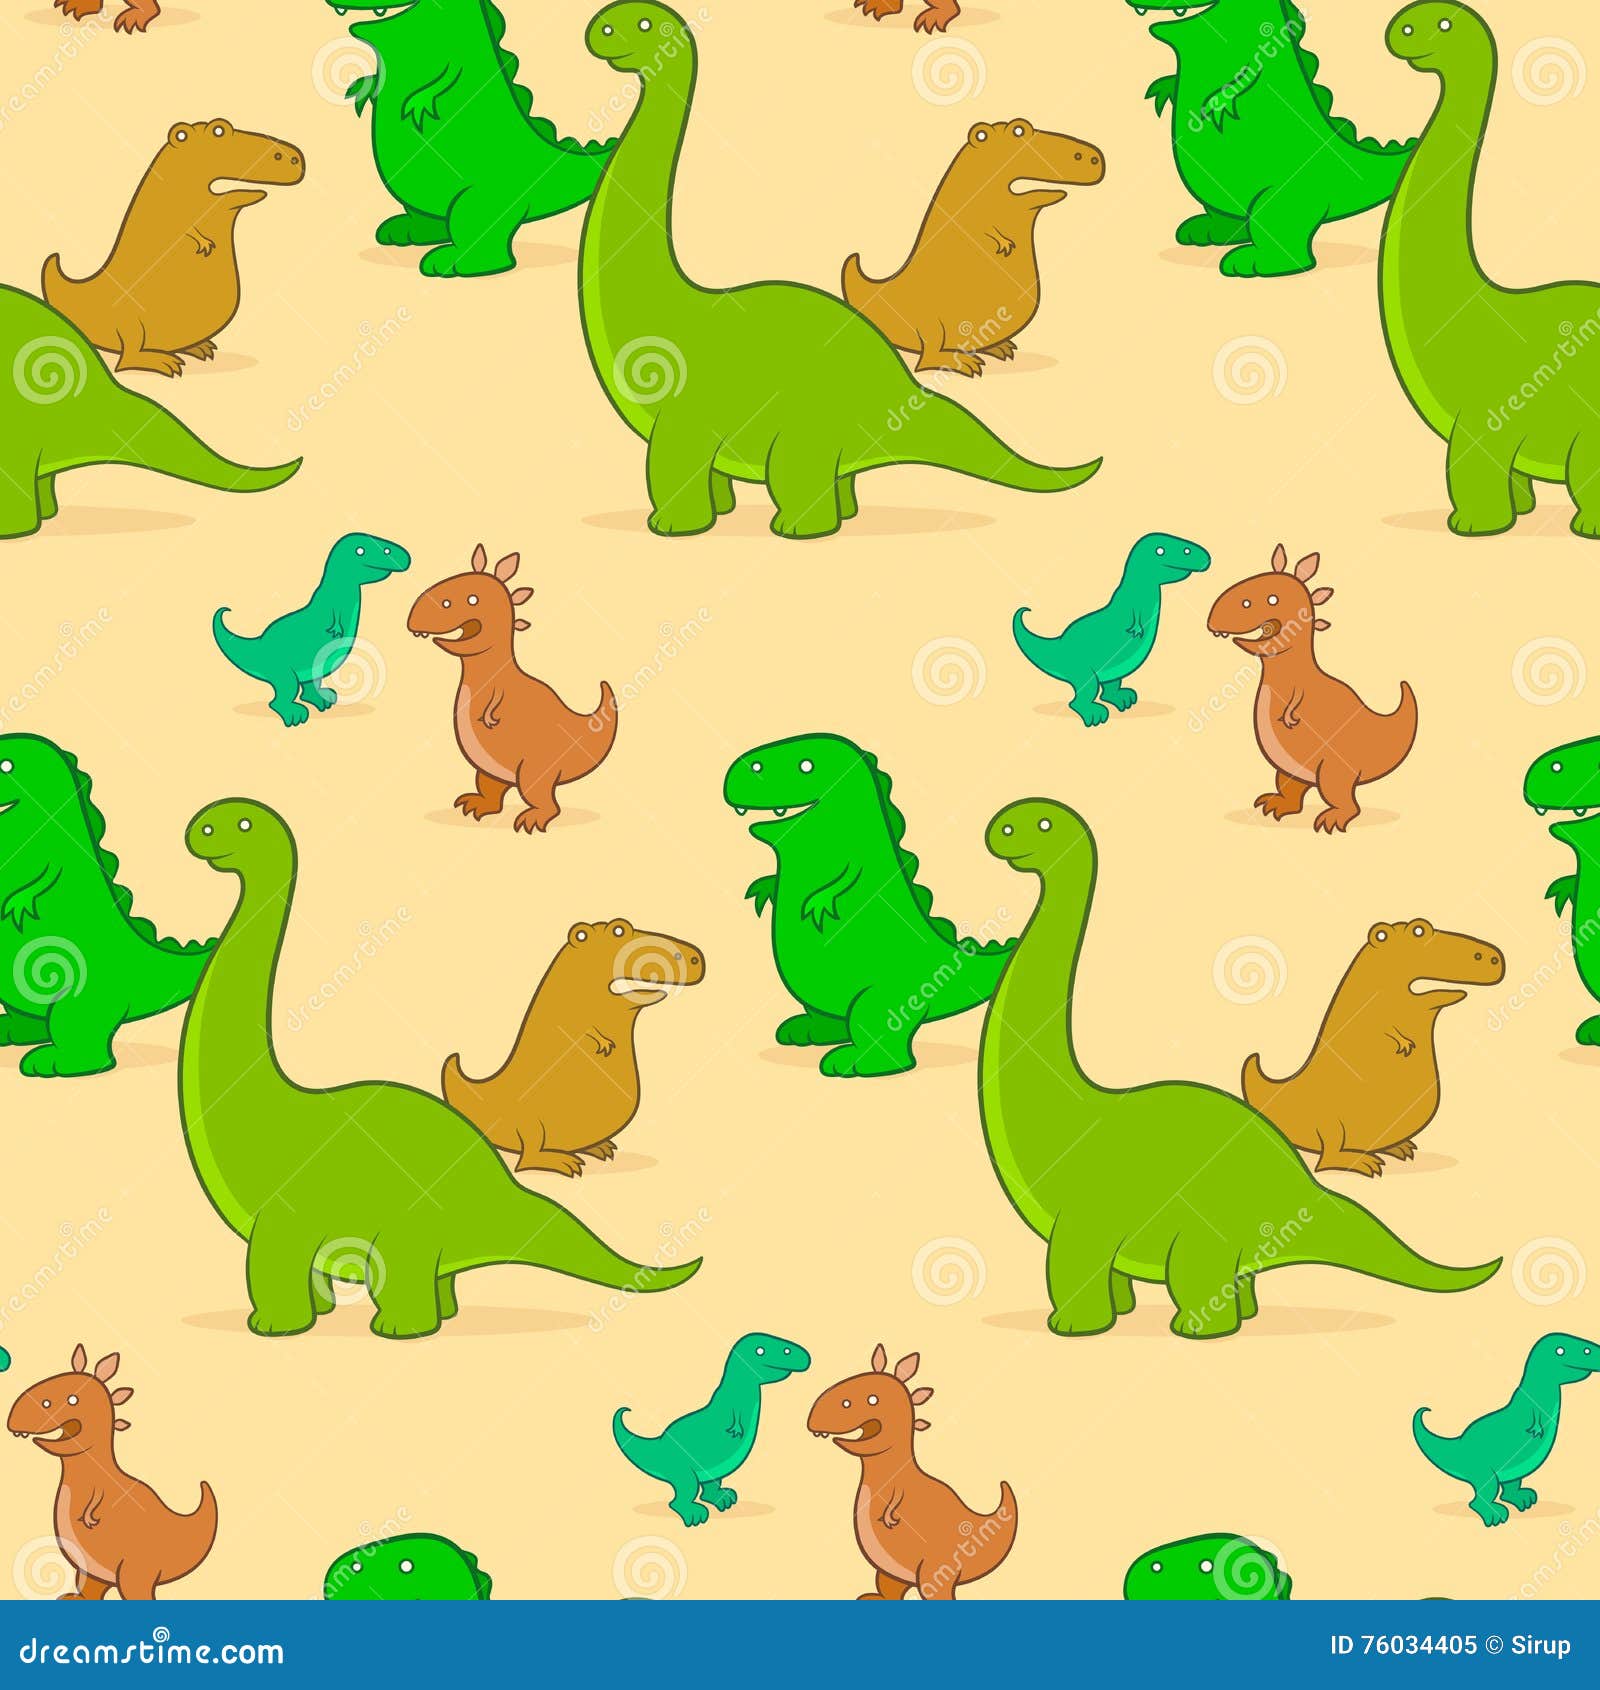 Cute Cartoon Dinosaur Background Pattern Stock Vector Illustration Of Design Godzilla 76034405 Sign up for free today! dreamstime com